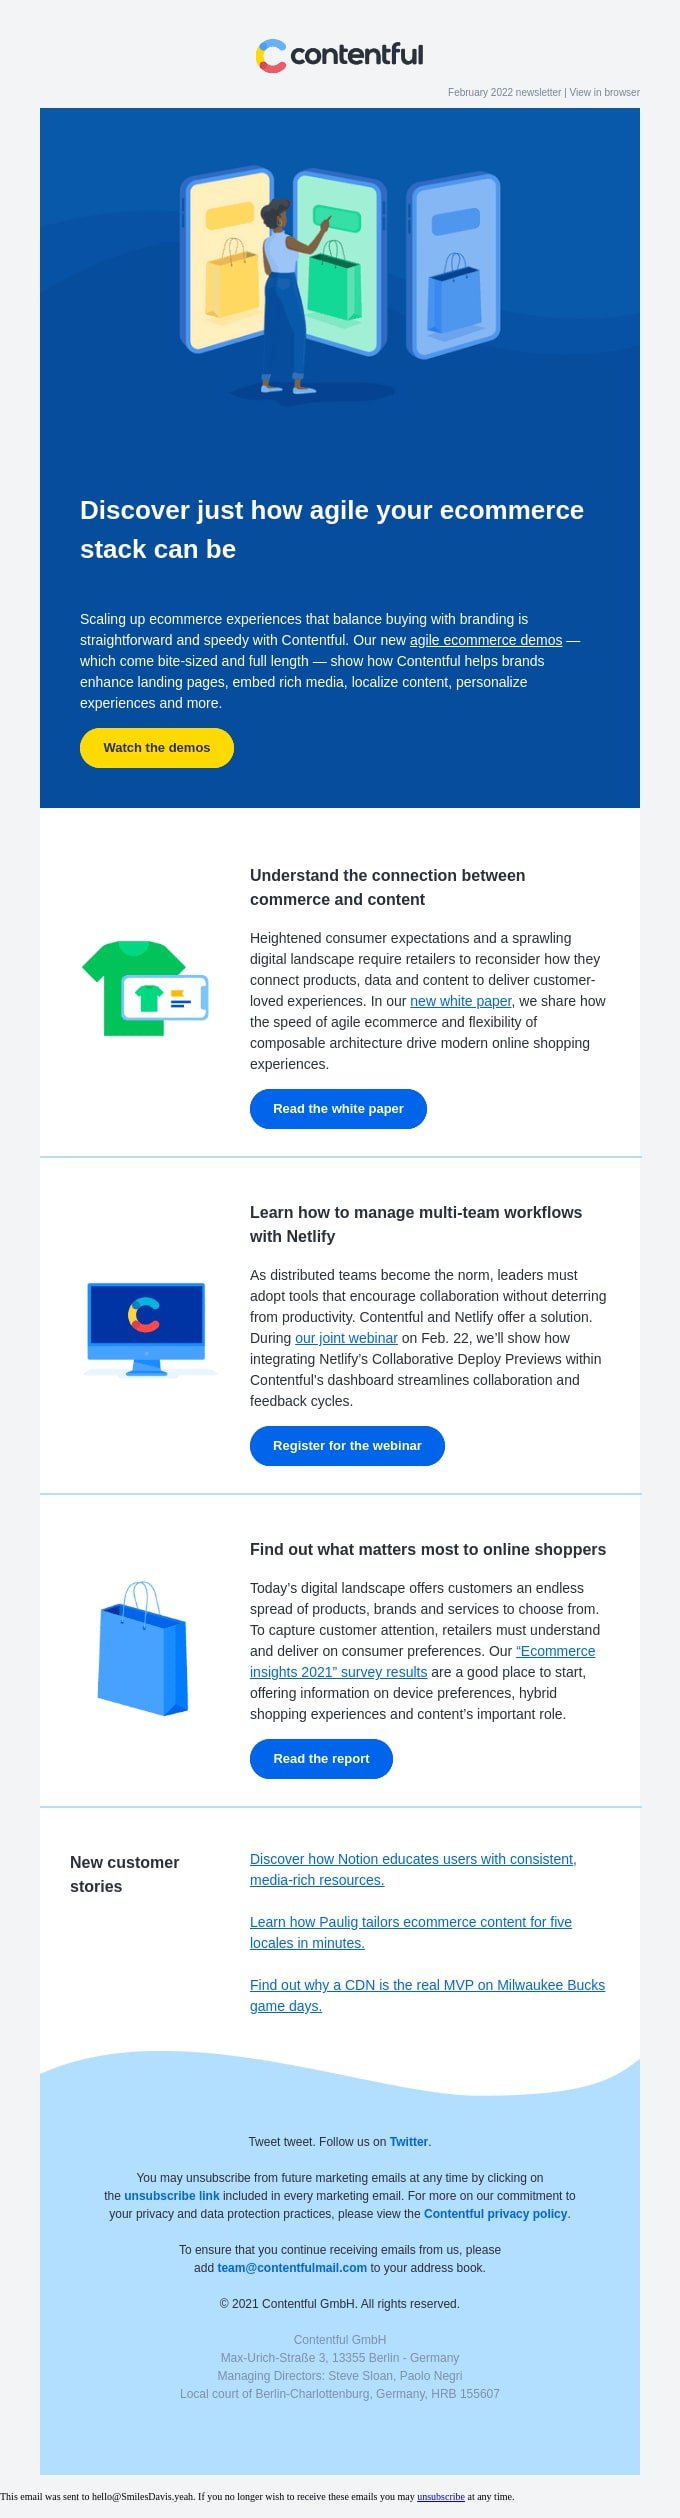 case-study-email-example